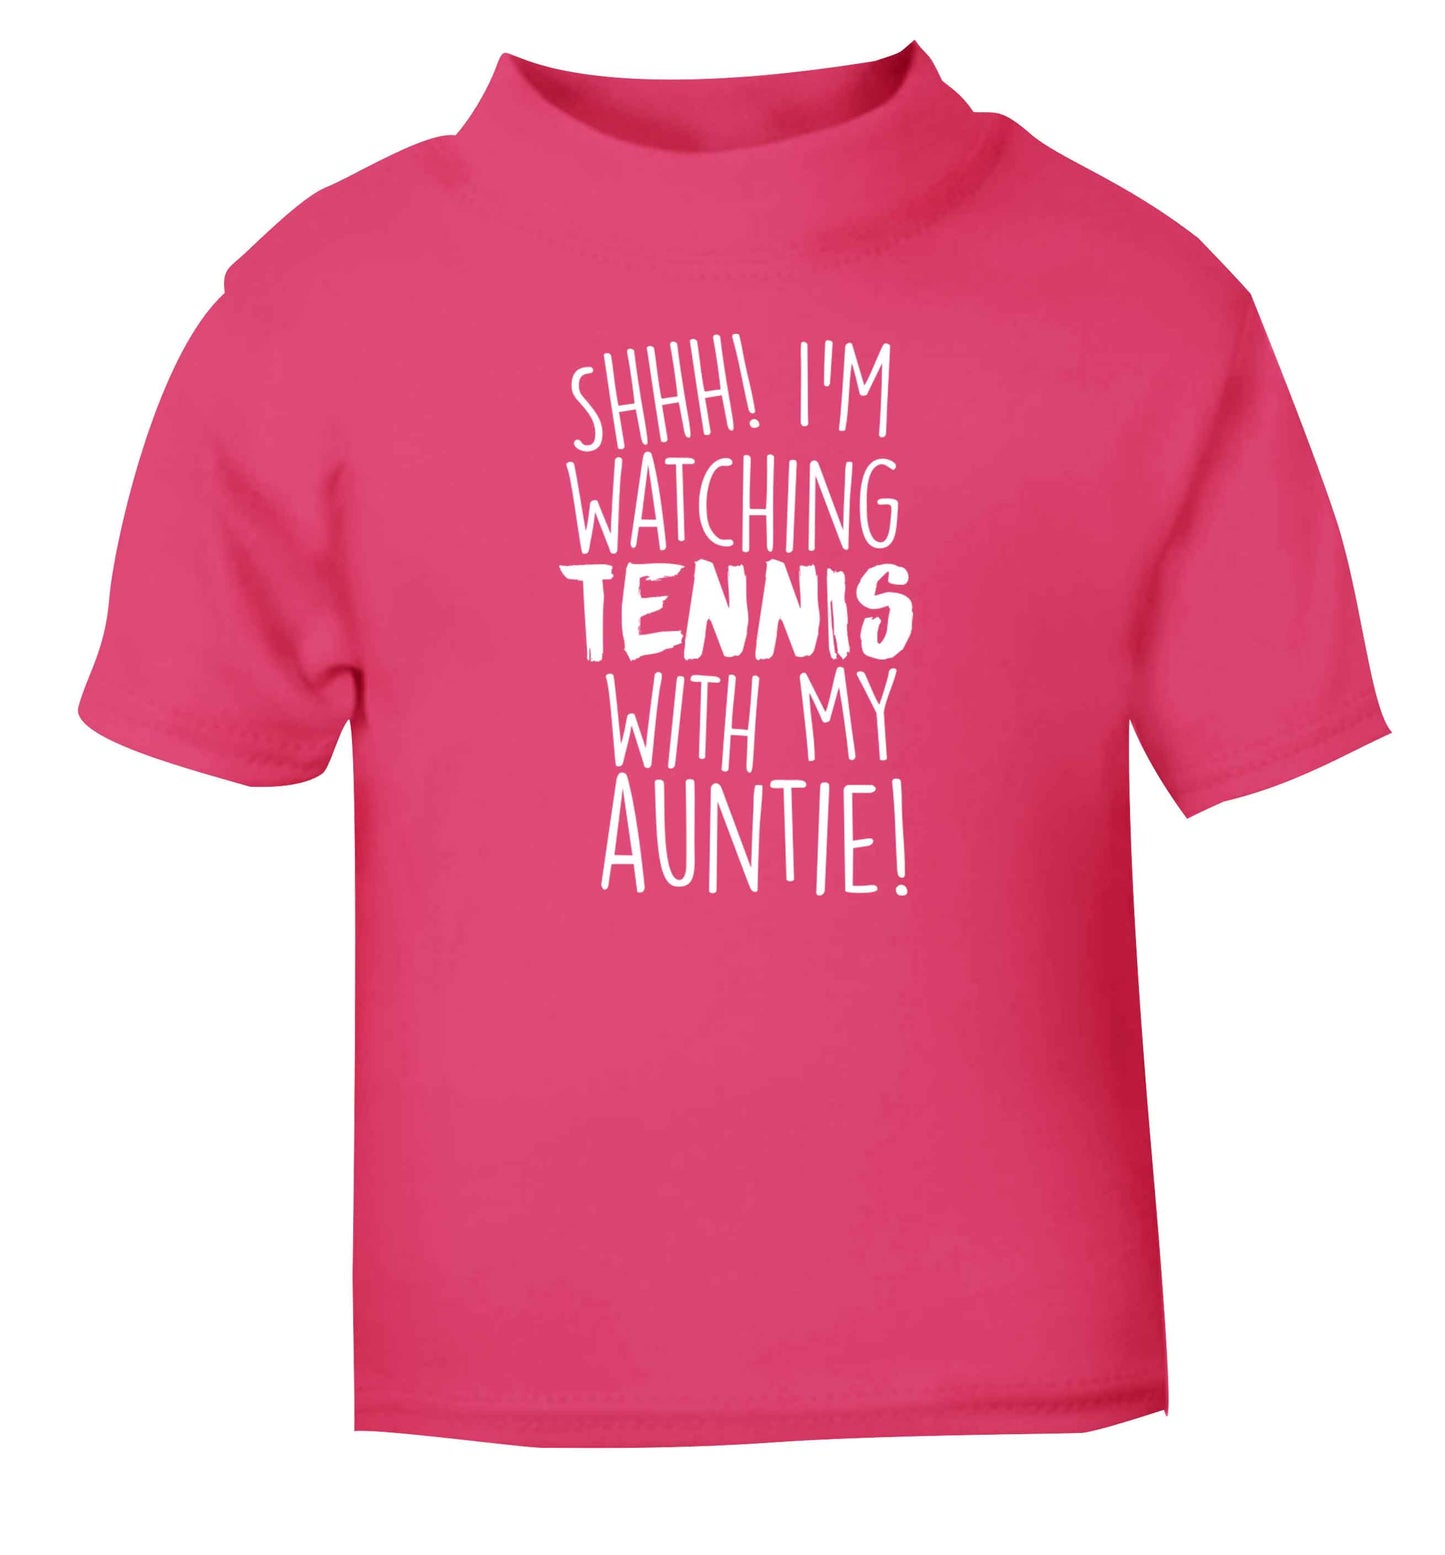 Shh! I'm watching tennis with my auntie! pink Baby Toddler Tshirt 2 Years